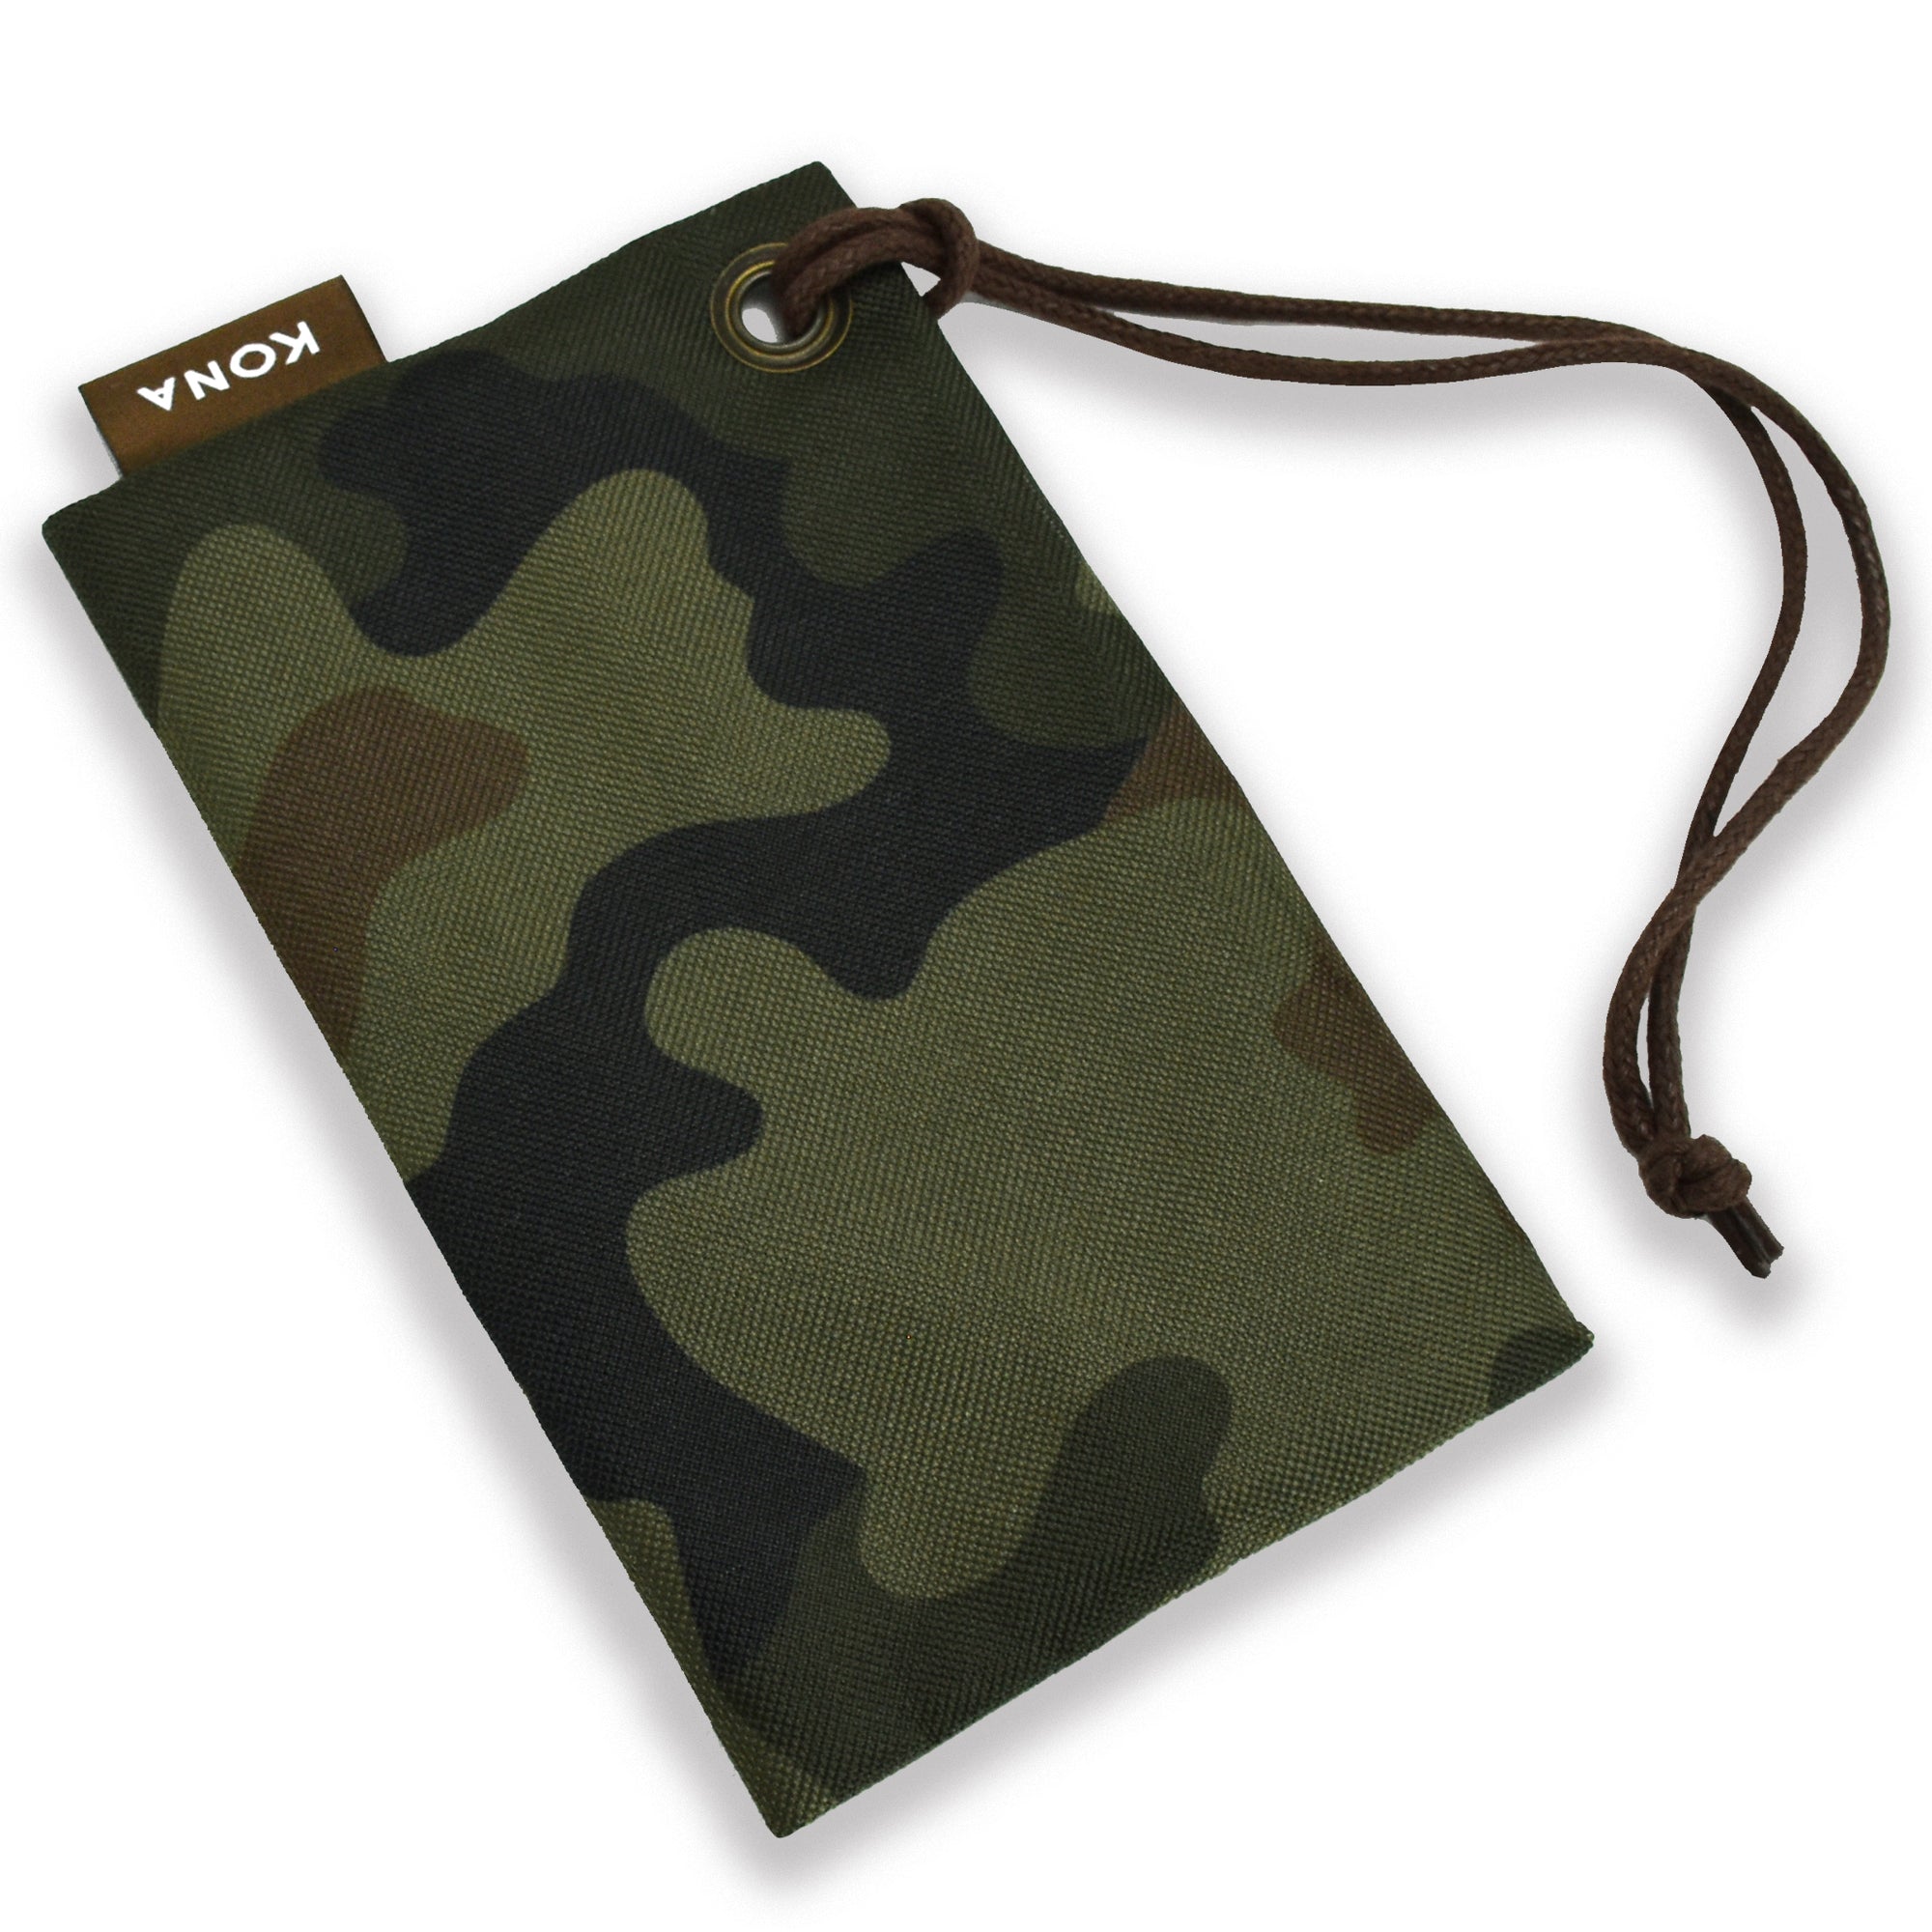 Essential Zipper Bag for Travel Dog Bed  - Camouflage Nylon